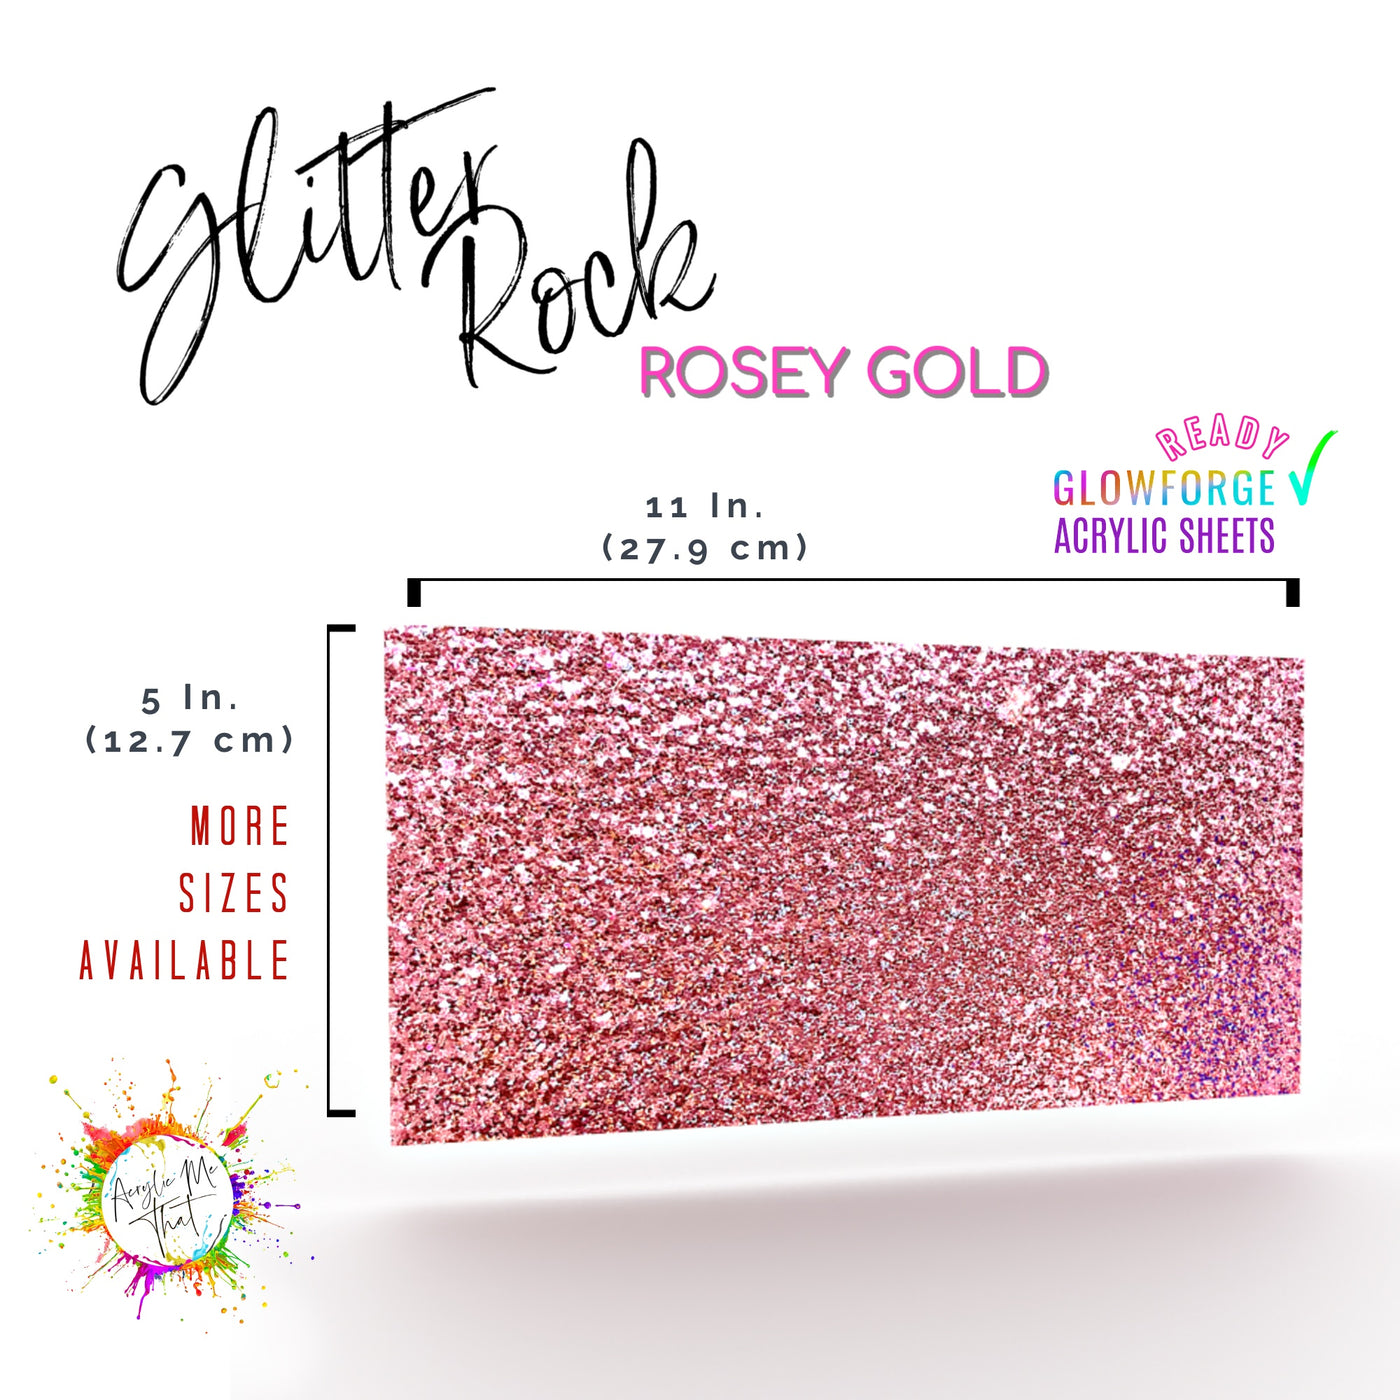 Rosey Gold Glitter Acrylic Sheet for laser cutting pink plexiglass laser safe material glowforge laserable 3mm acrylics